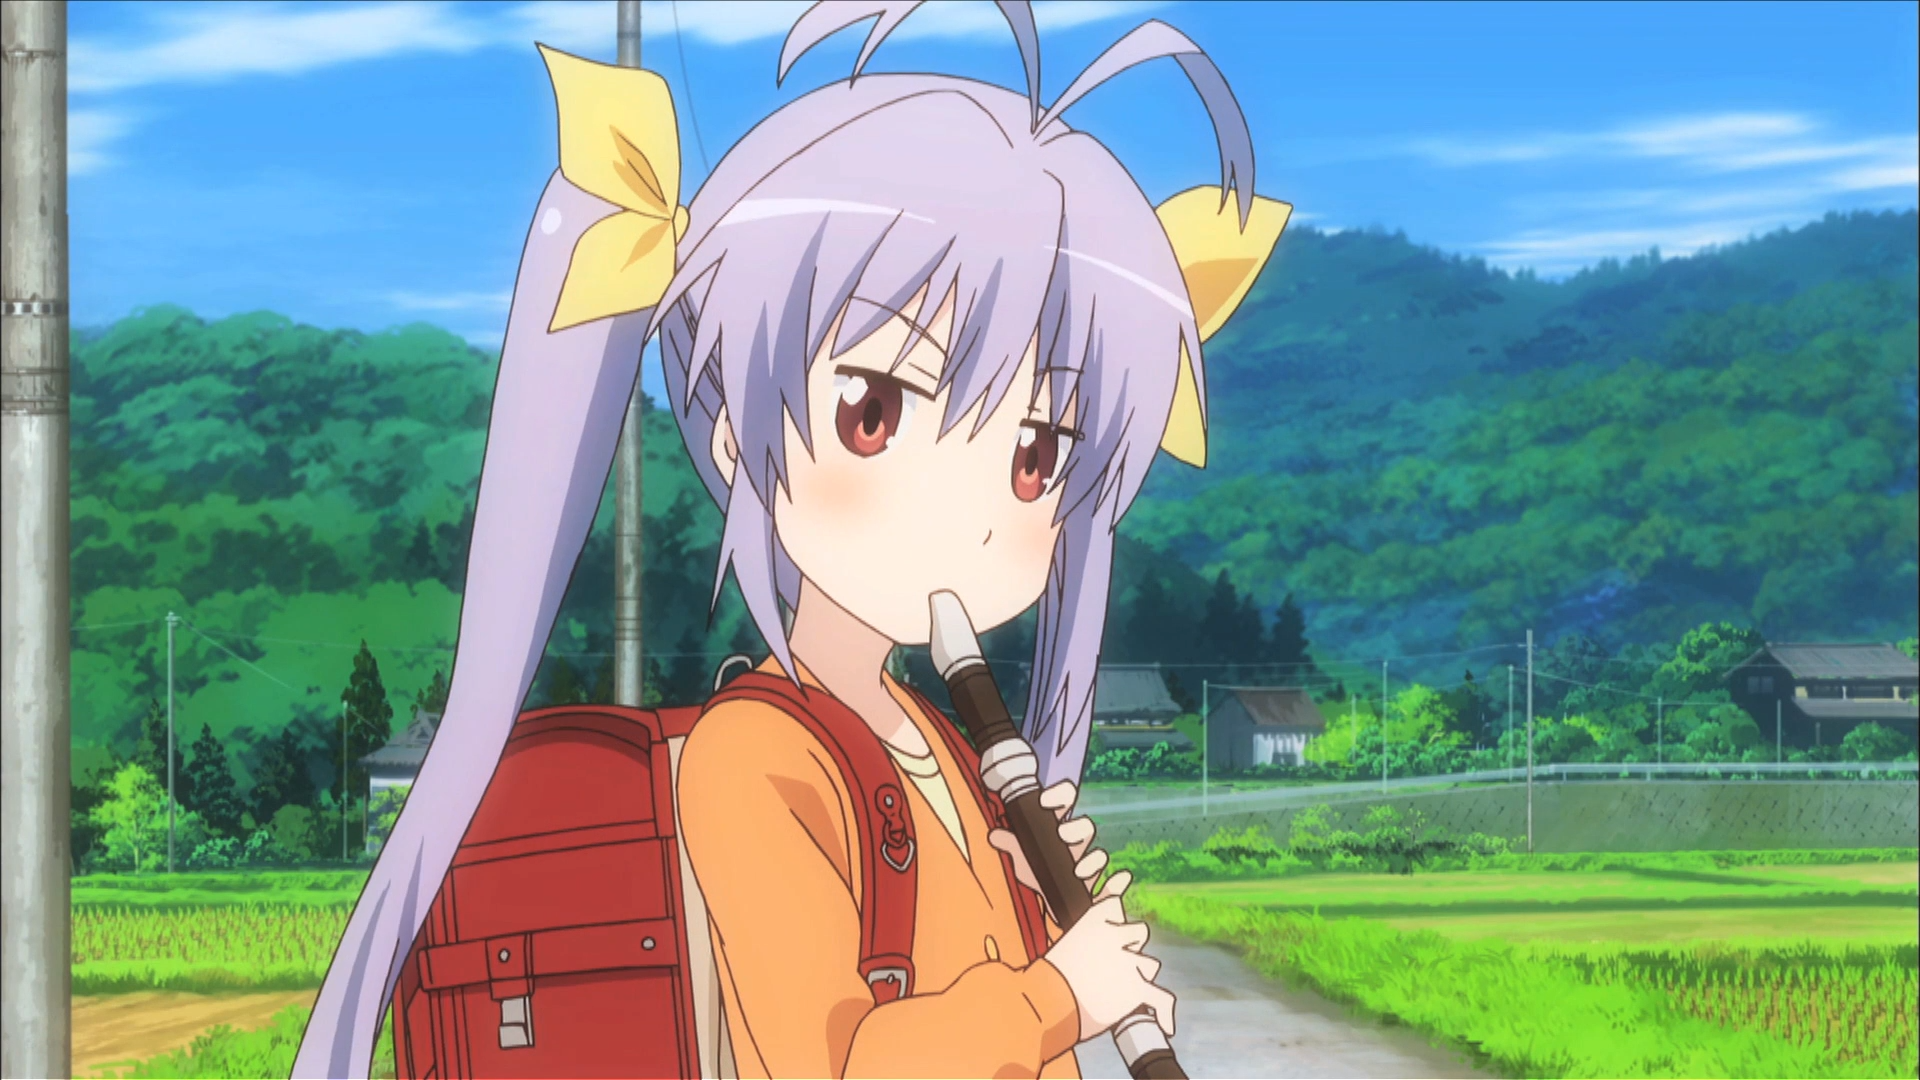 Renge comes to a disturbing realization that she lives out in the boonies while playing her recorder in a scene from the Non Non Biyori TV anime.